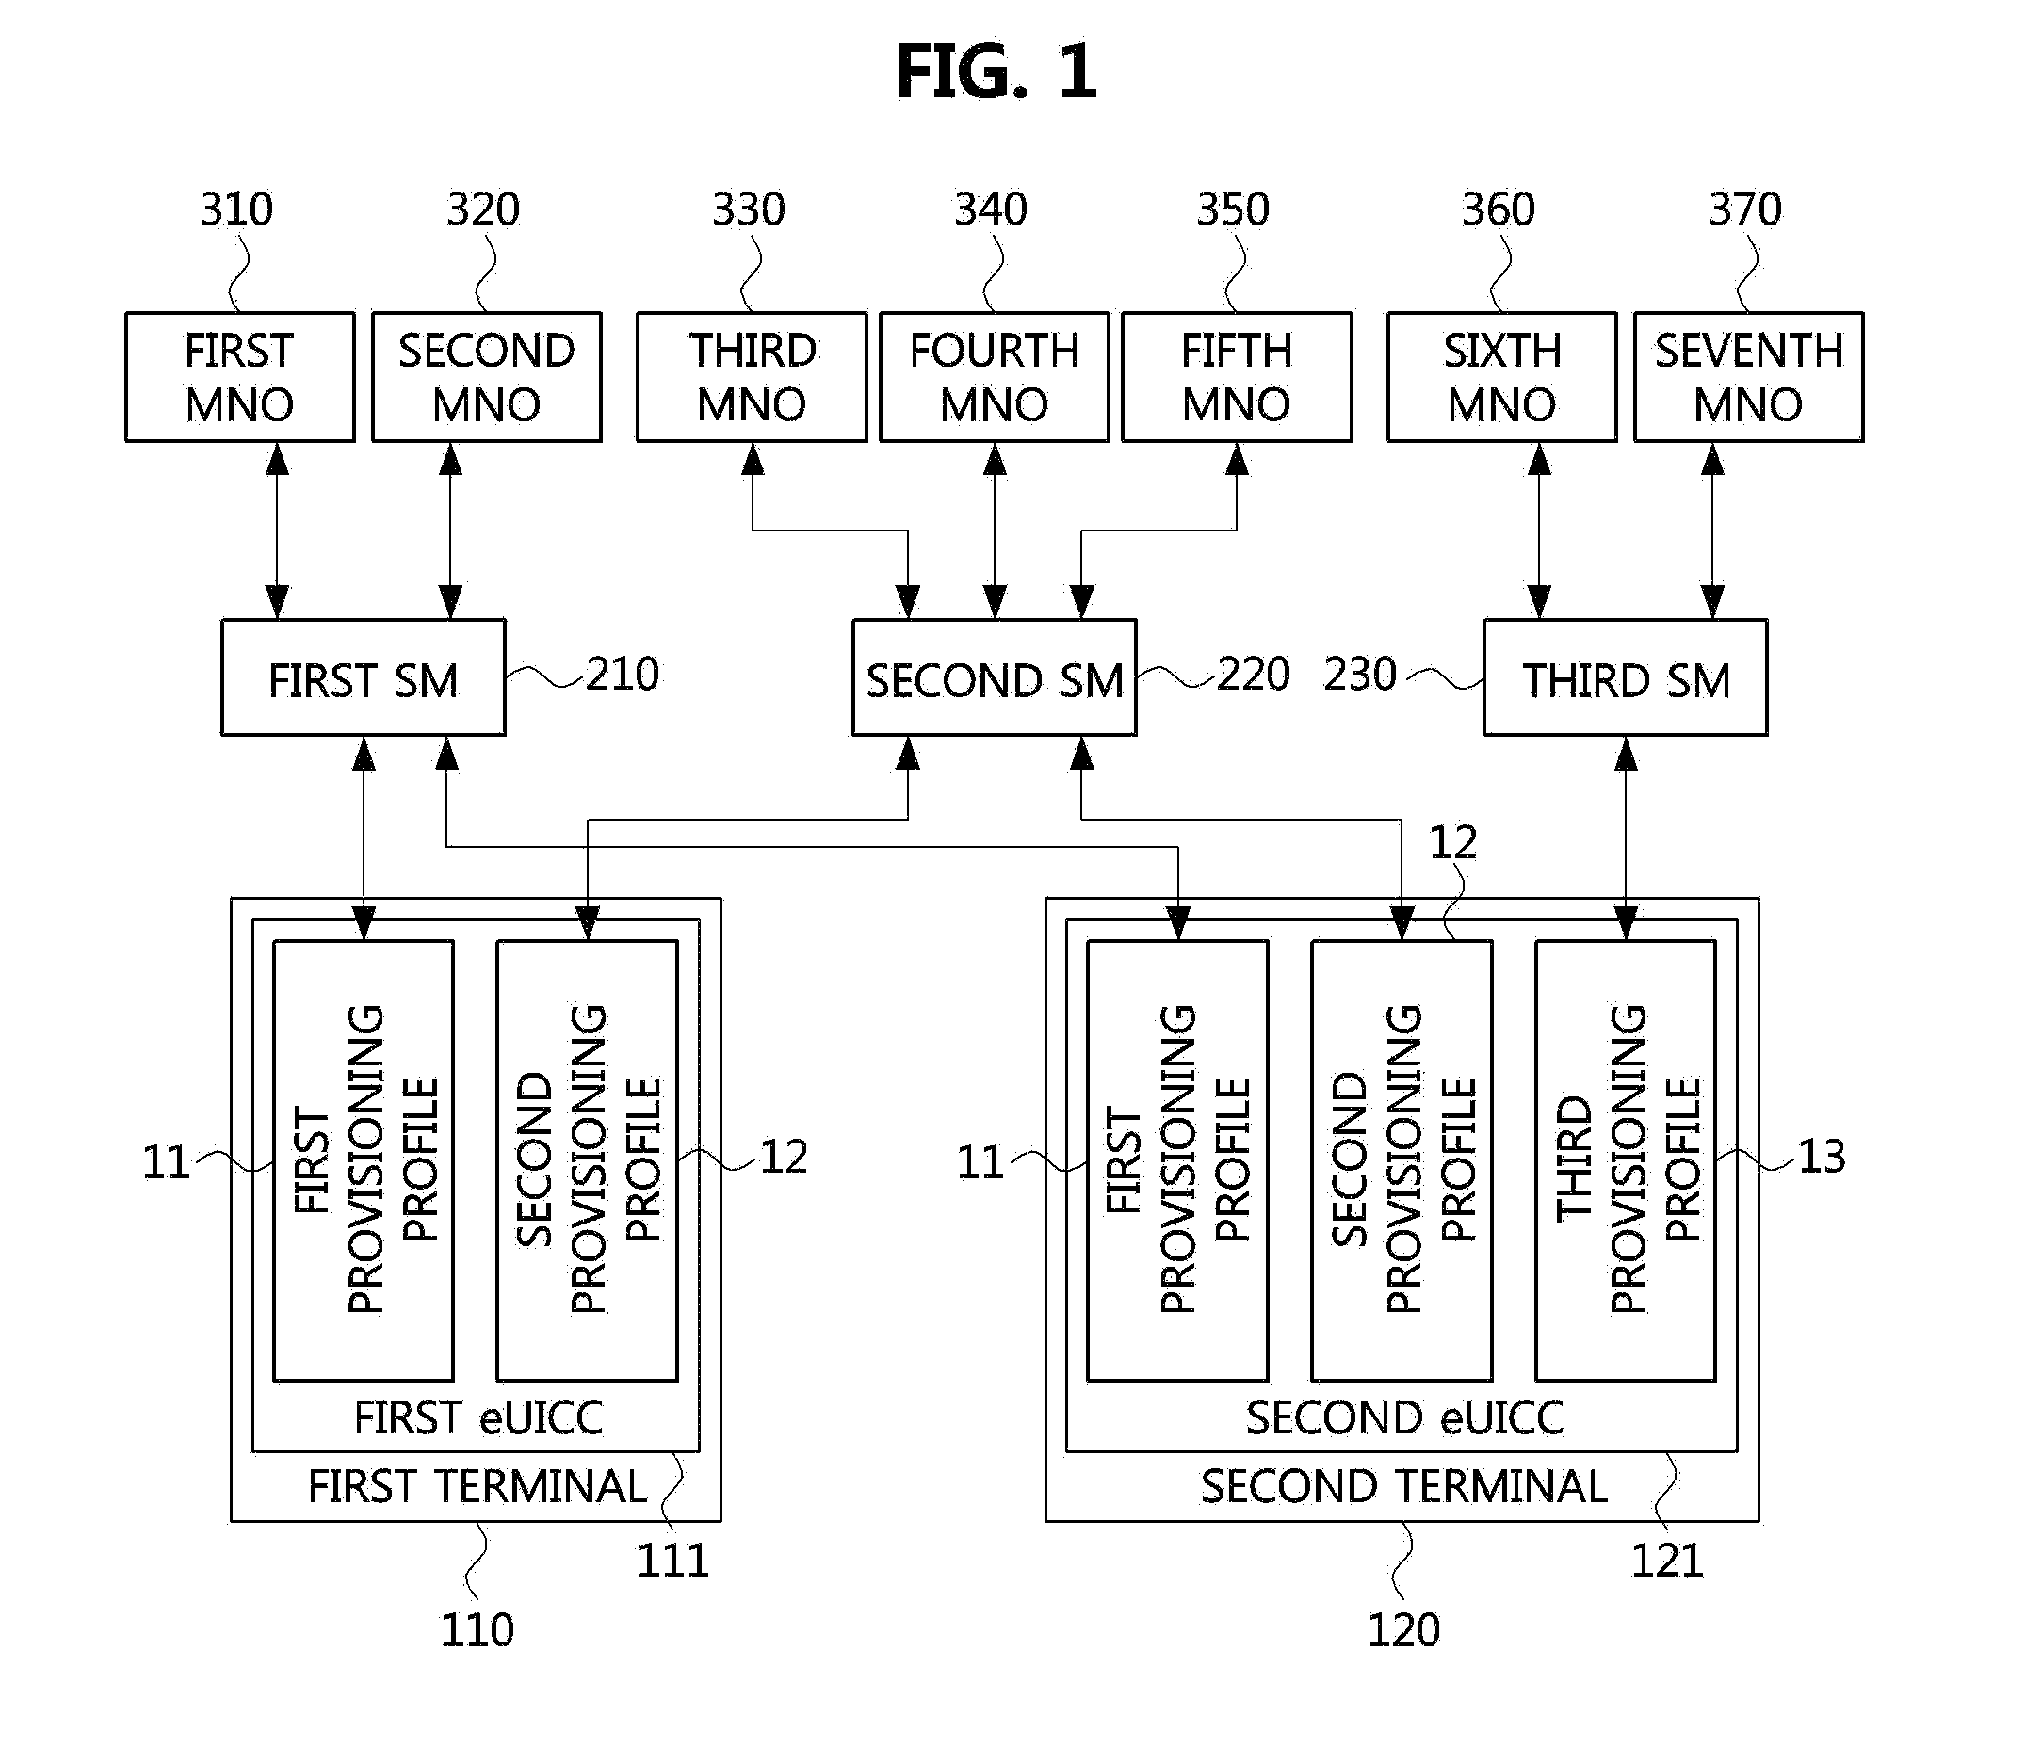 Method for selecting mobile communication network provider using provisioning profile, and apparatus using same